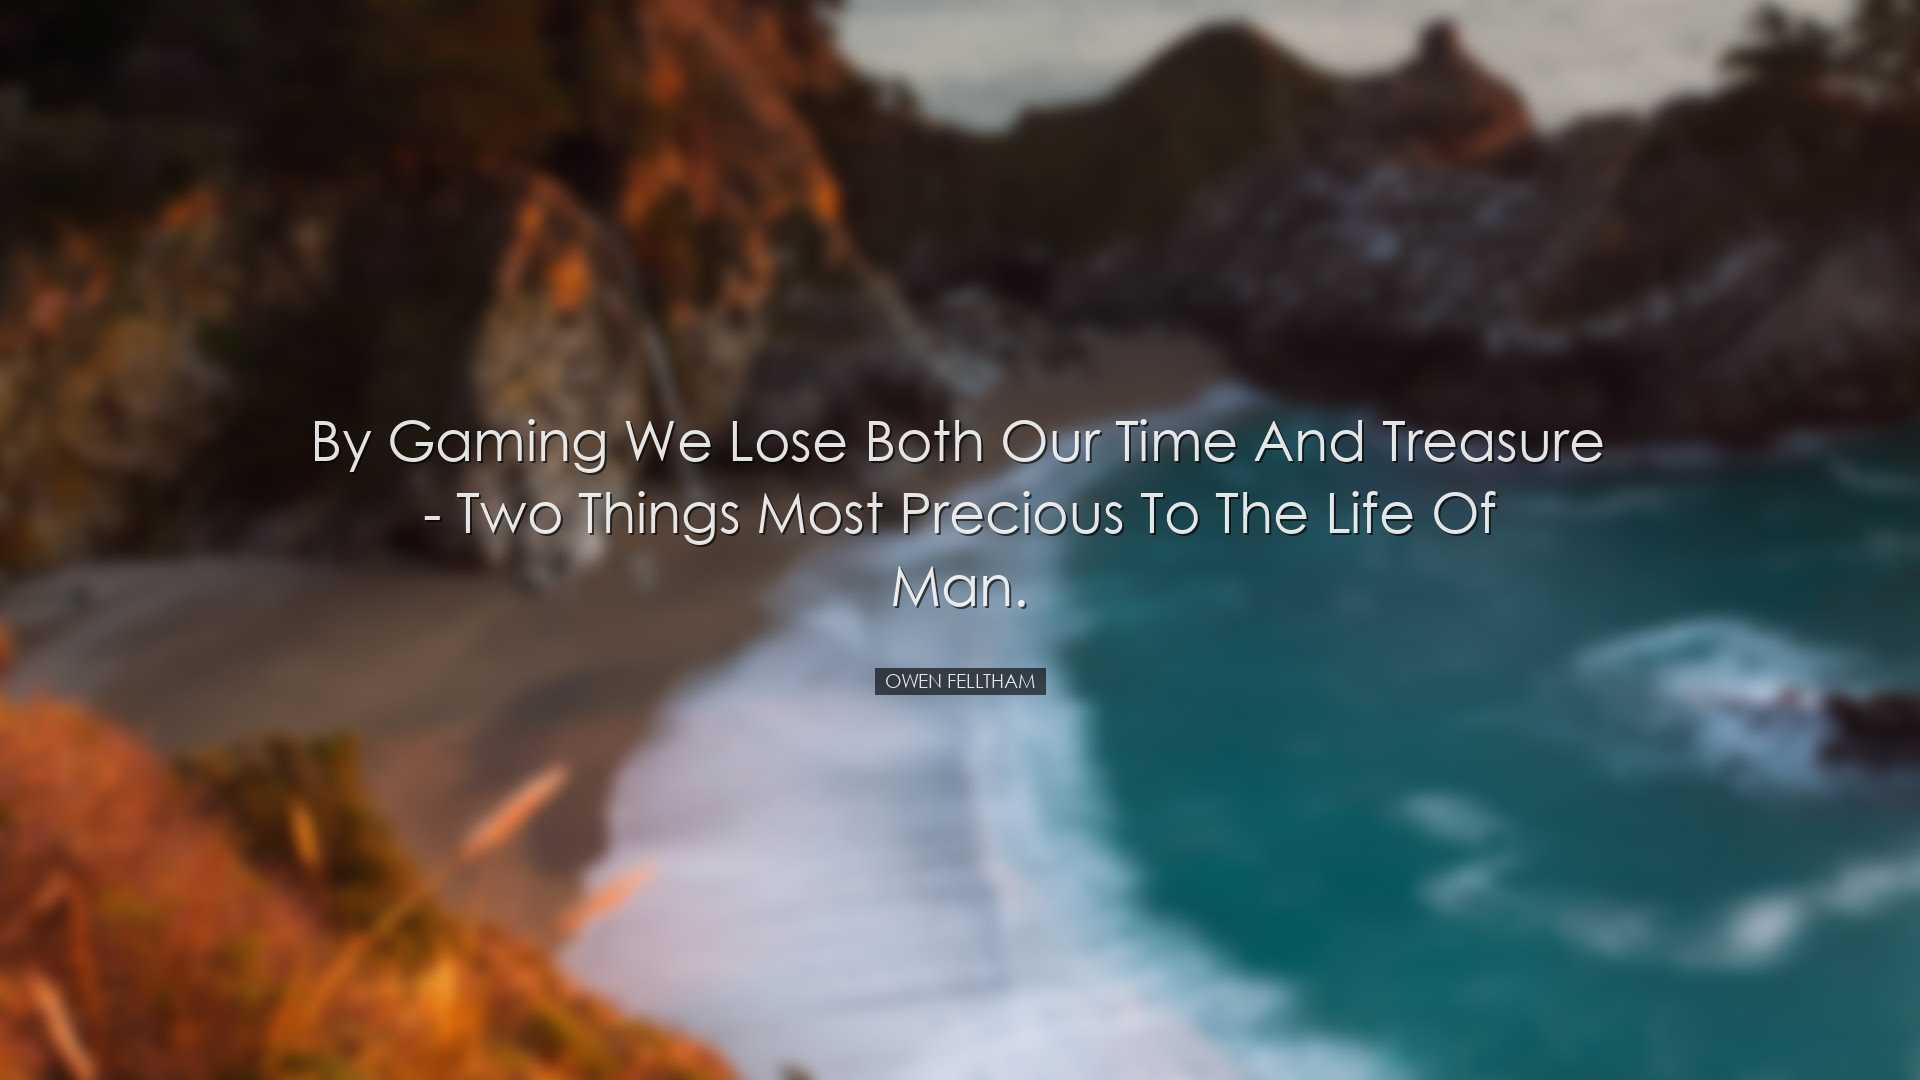 By gaming we lose both our time and treasure - two things most pre